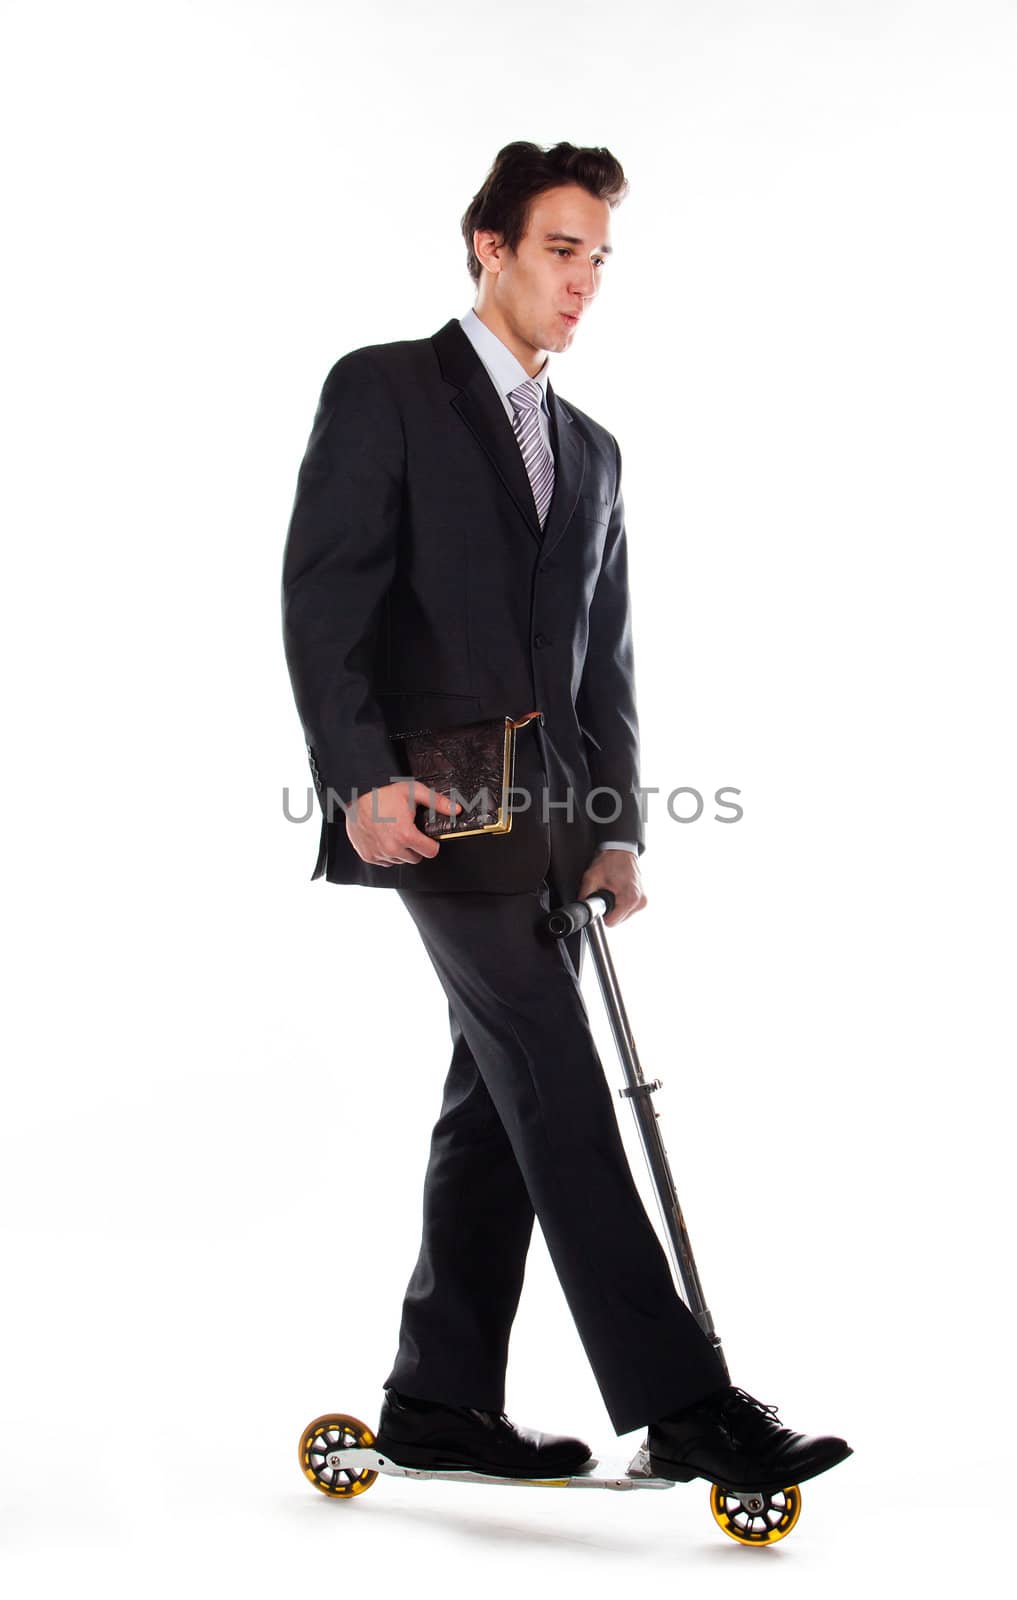 Portrait of a young respectable and successful man in a dark business suit who rides a scooter